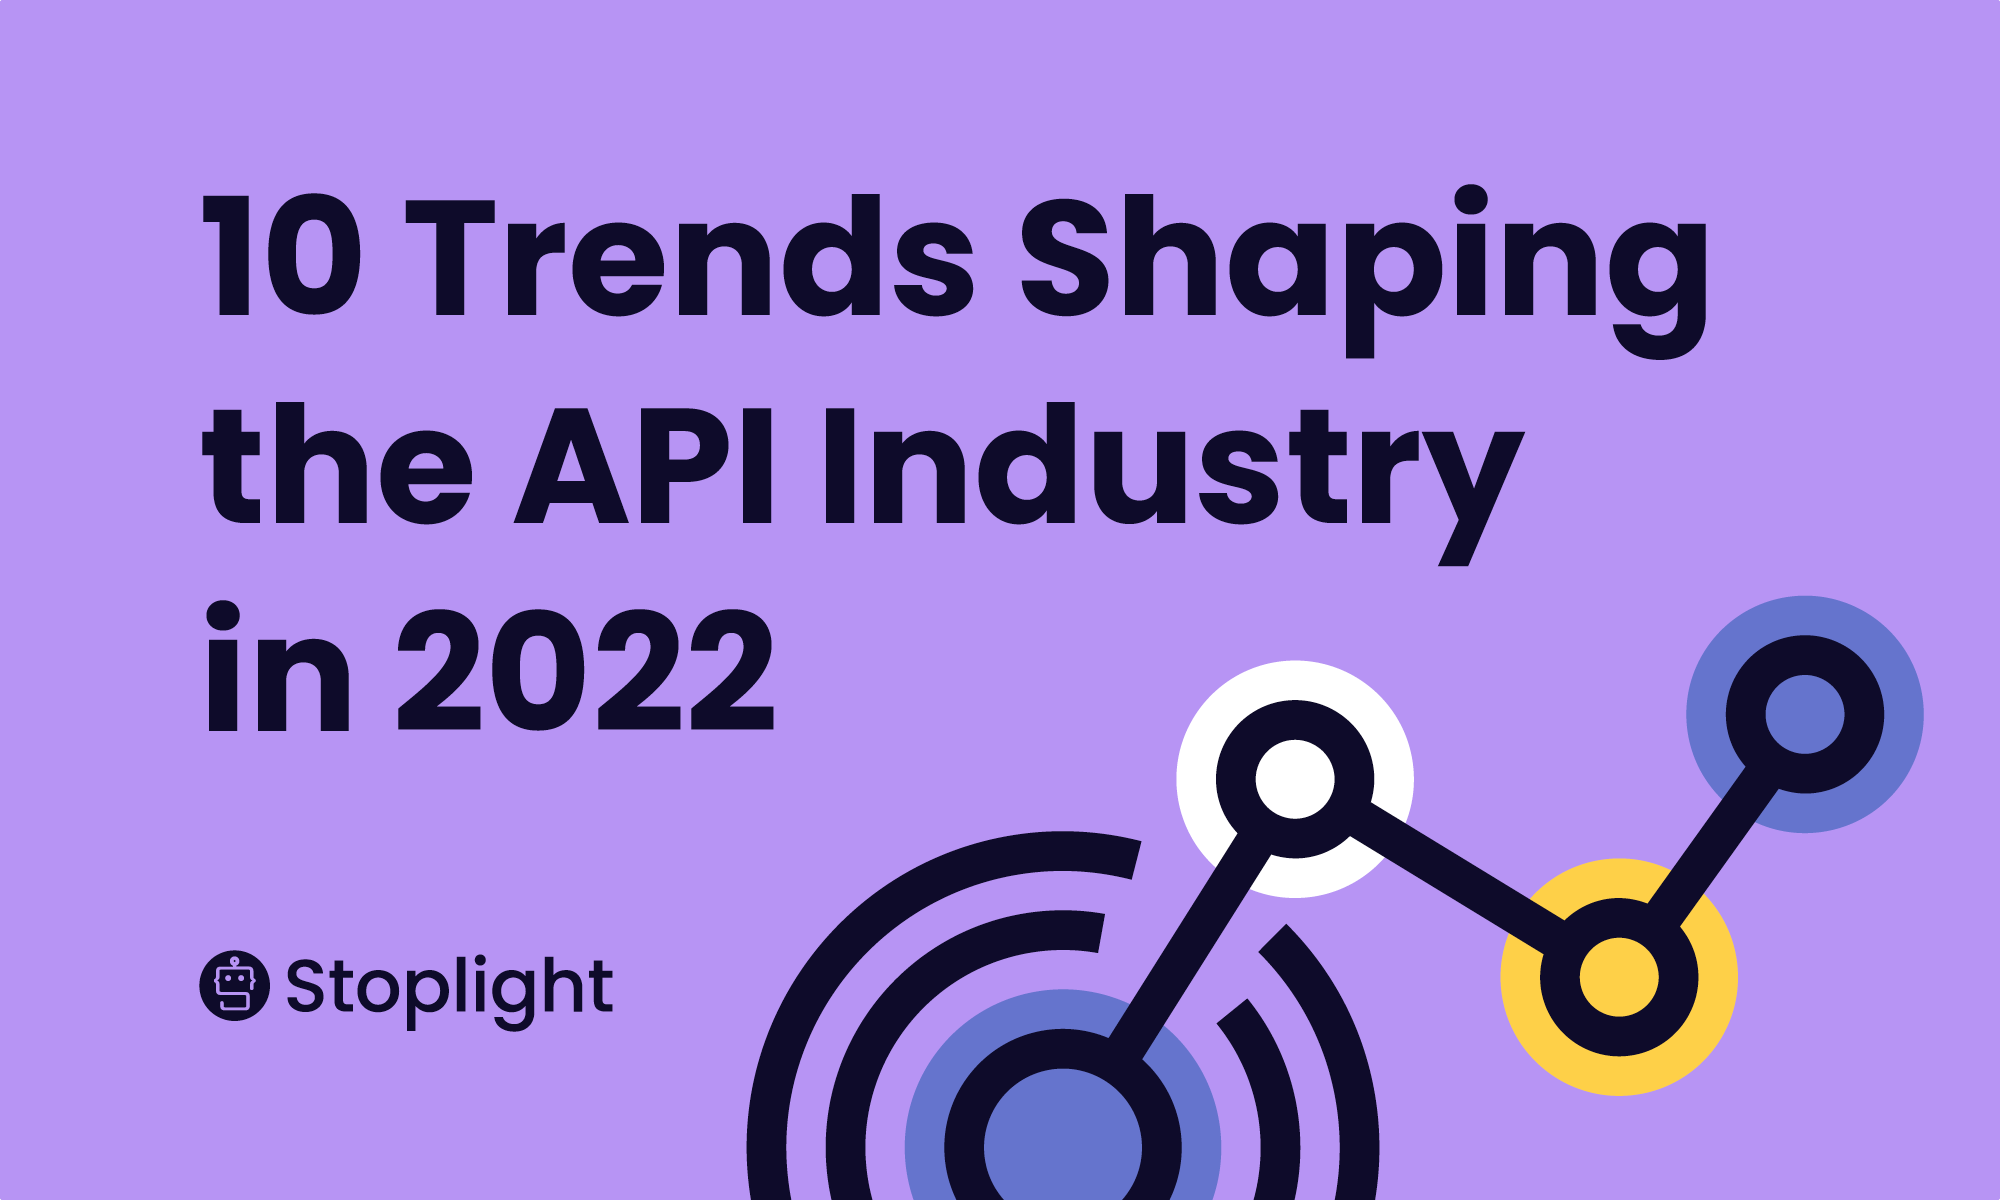 10 Trends Shaping the API Industry in 2022